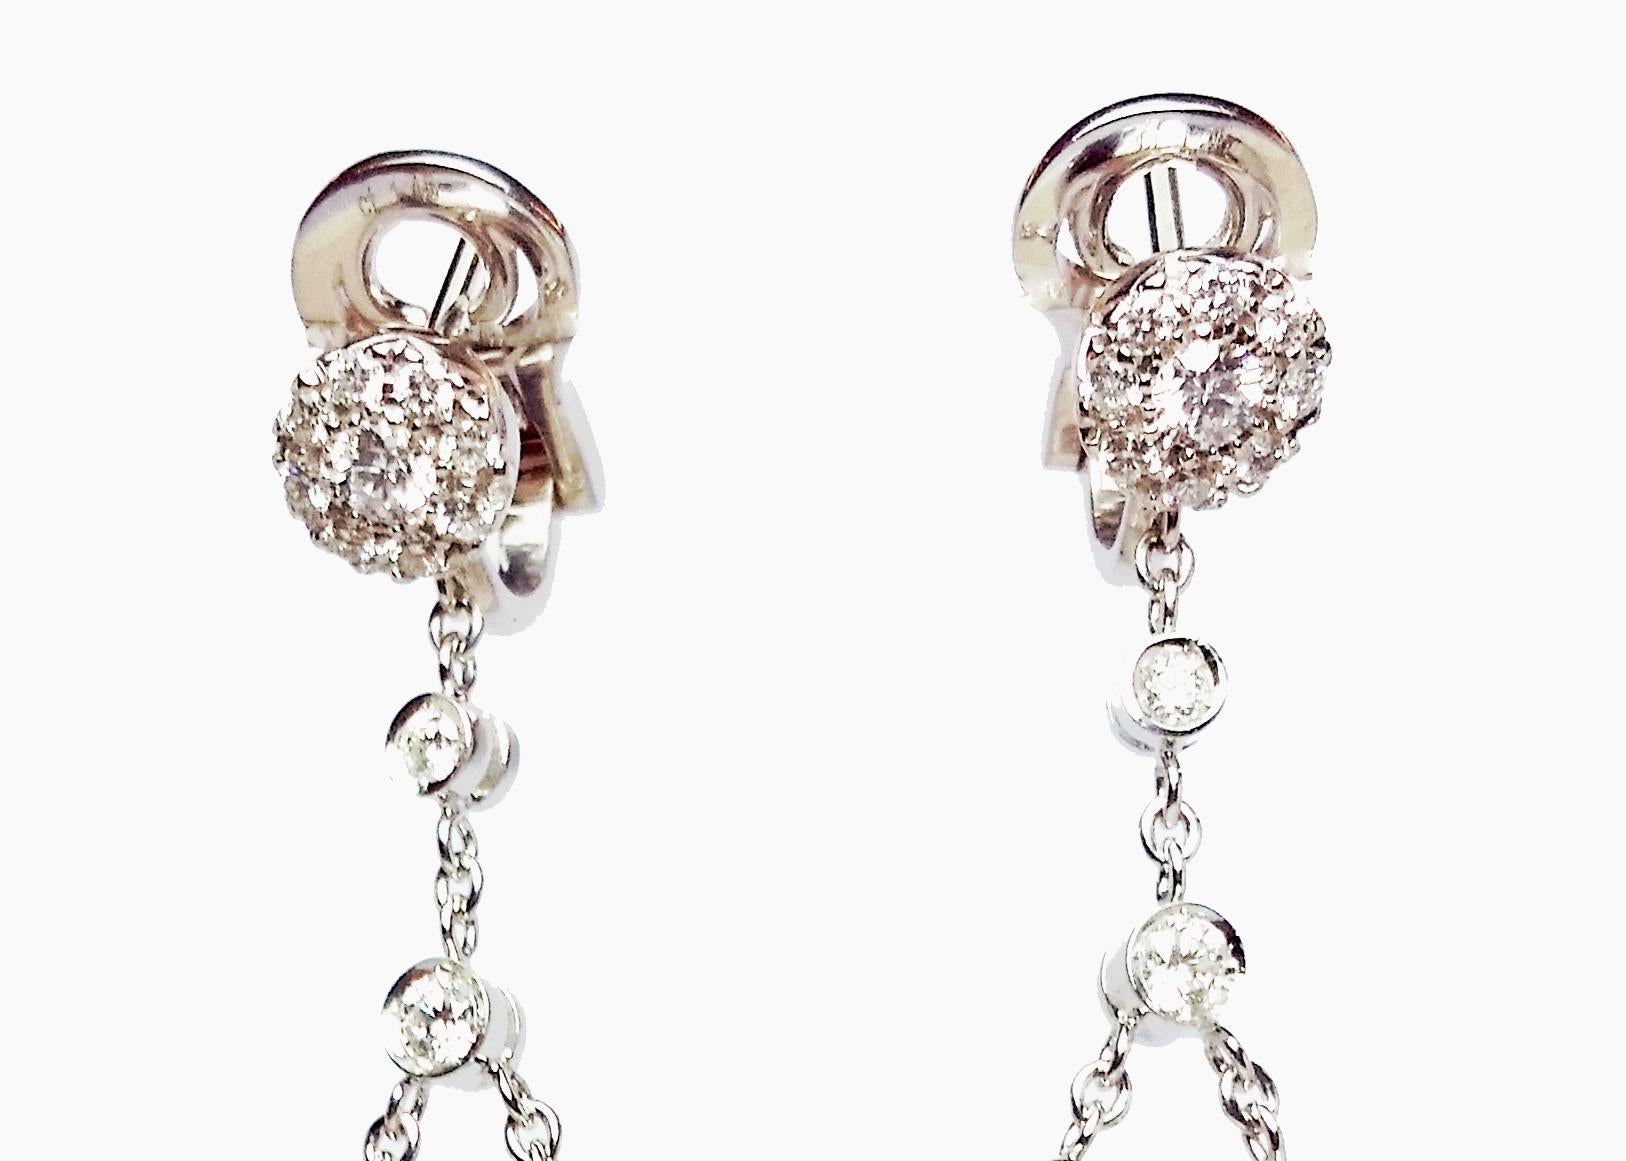 18 Karat White Gold Tassel Earrings Featuring 82 Round Diamonds Of VS Clarity & G Color Totaling 1.23 Carats. Pierced Post With Clip Back For Support. 